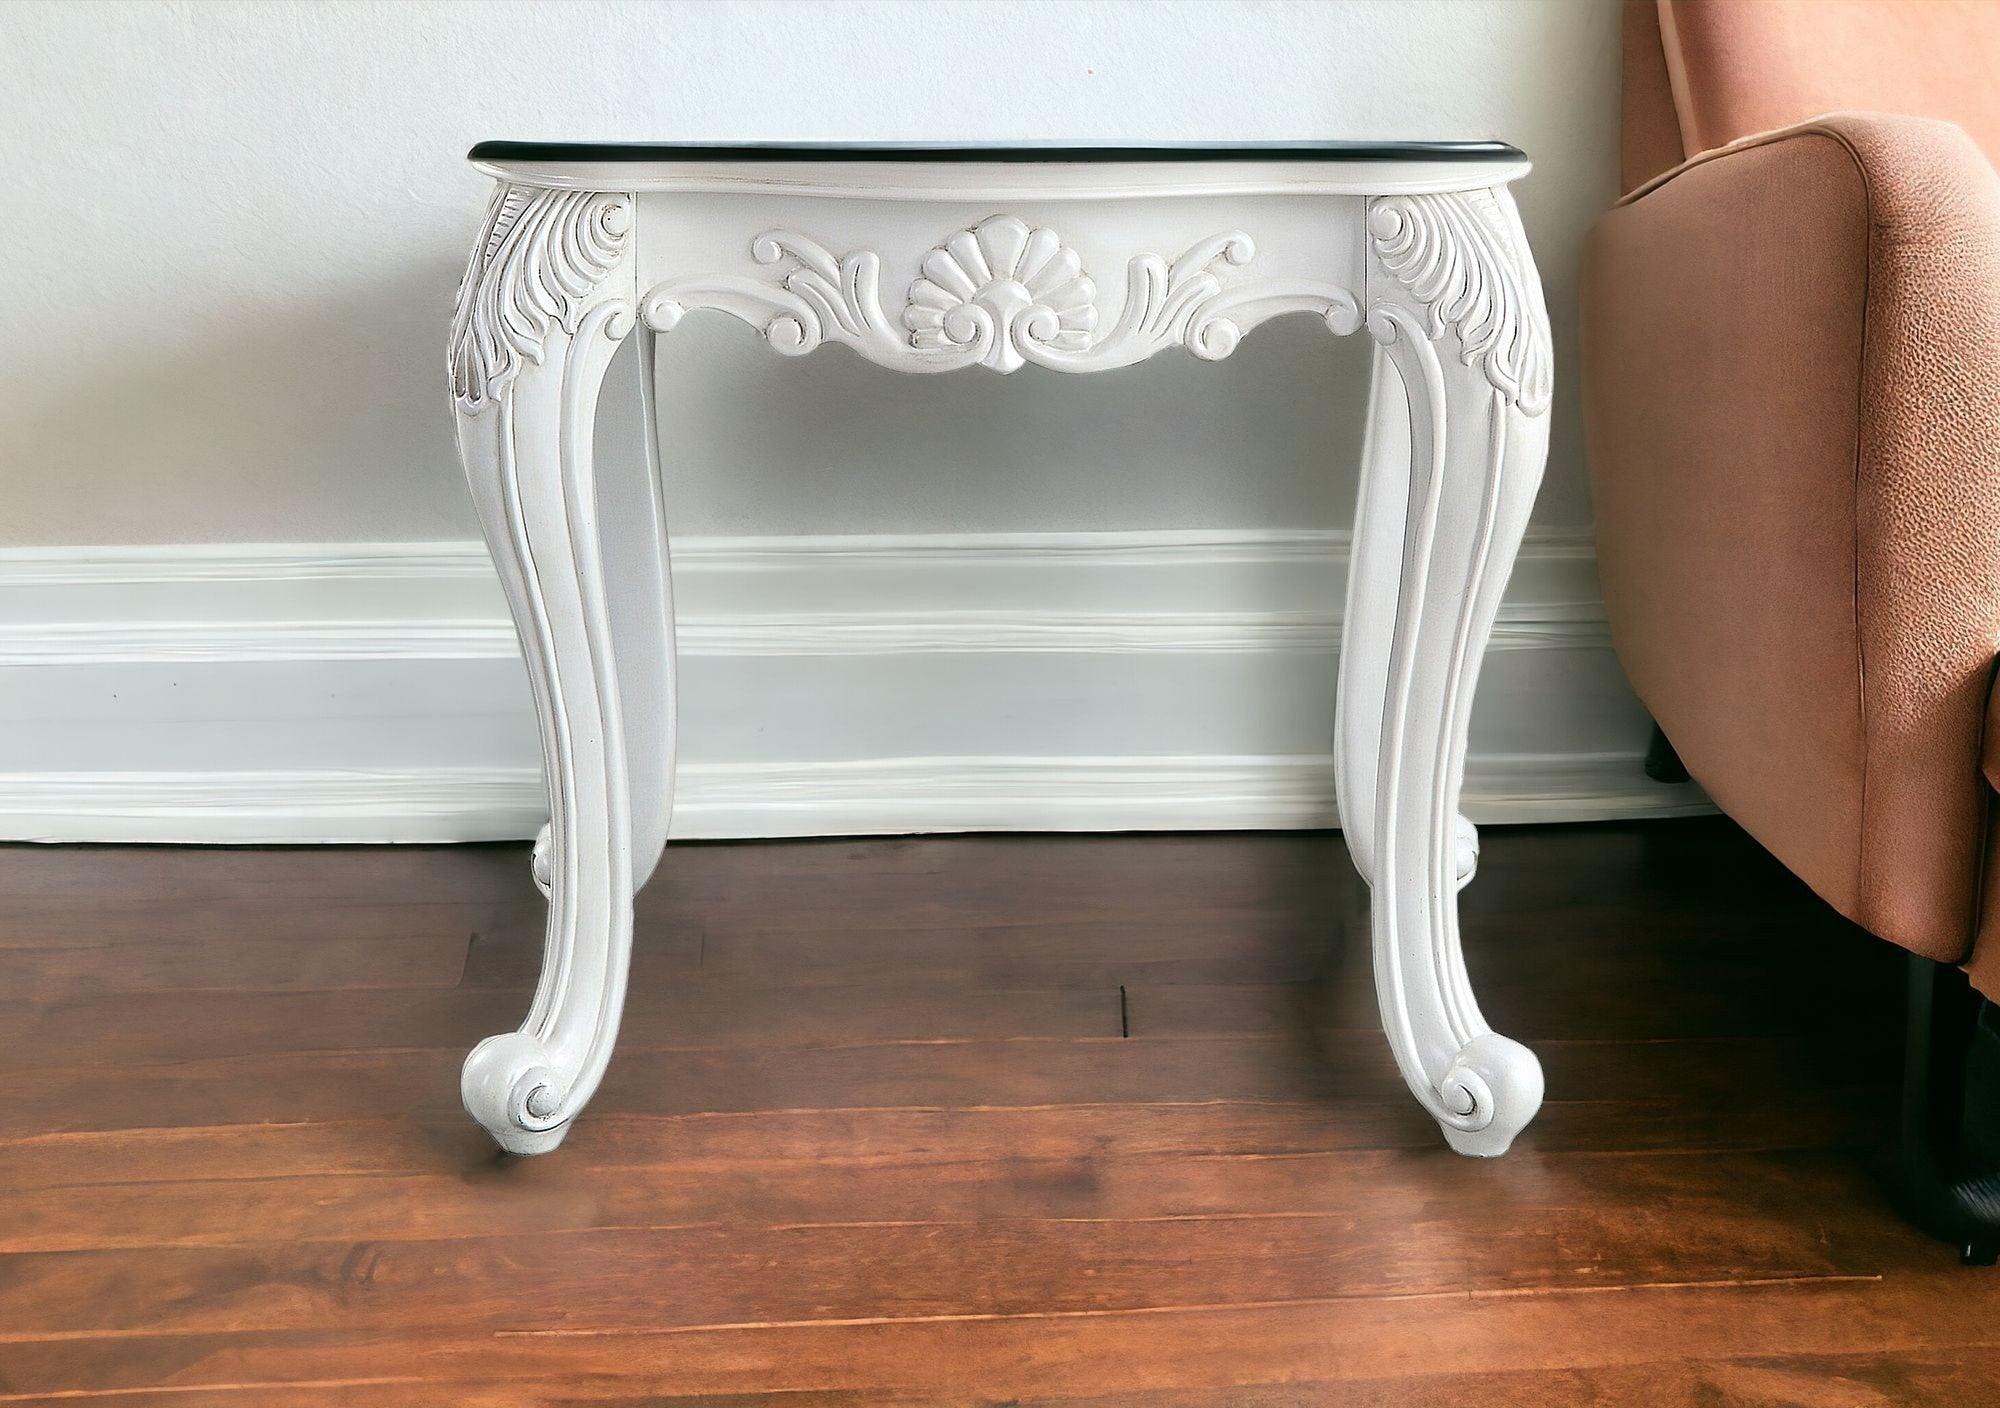 24" White And Marble Marble And Polyresin Rectangular End Table